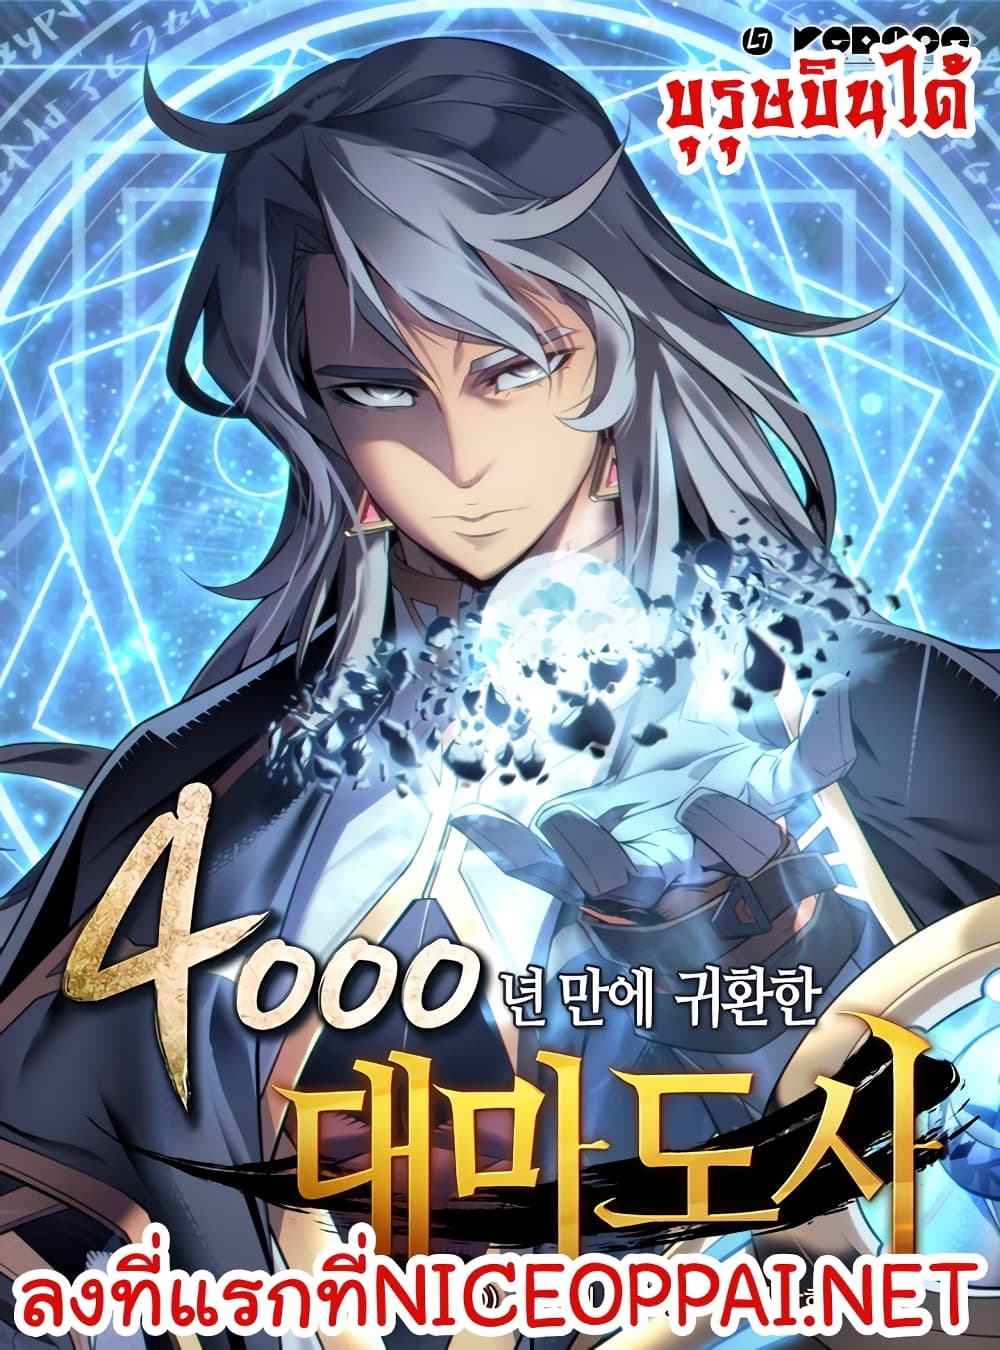 The Great Mage Returns After 4000 Years 48 (1)